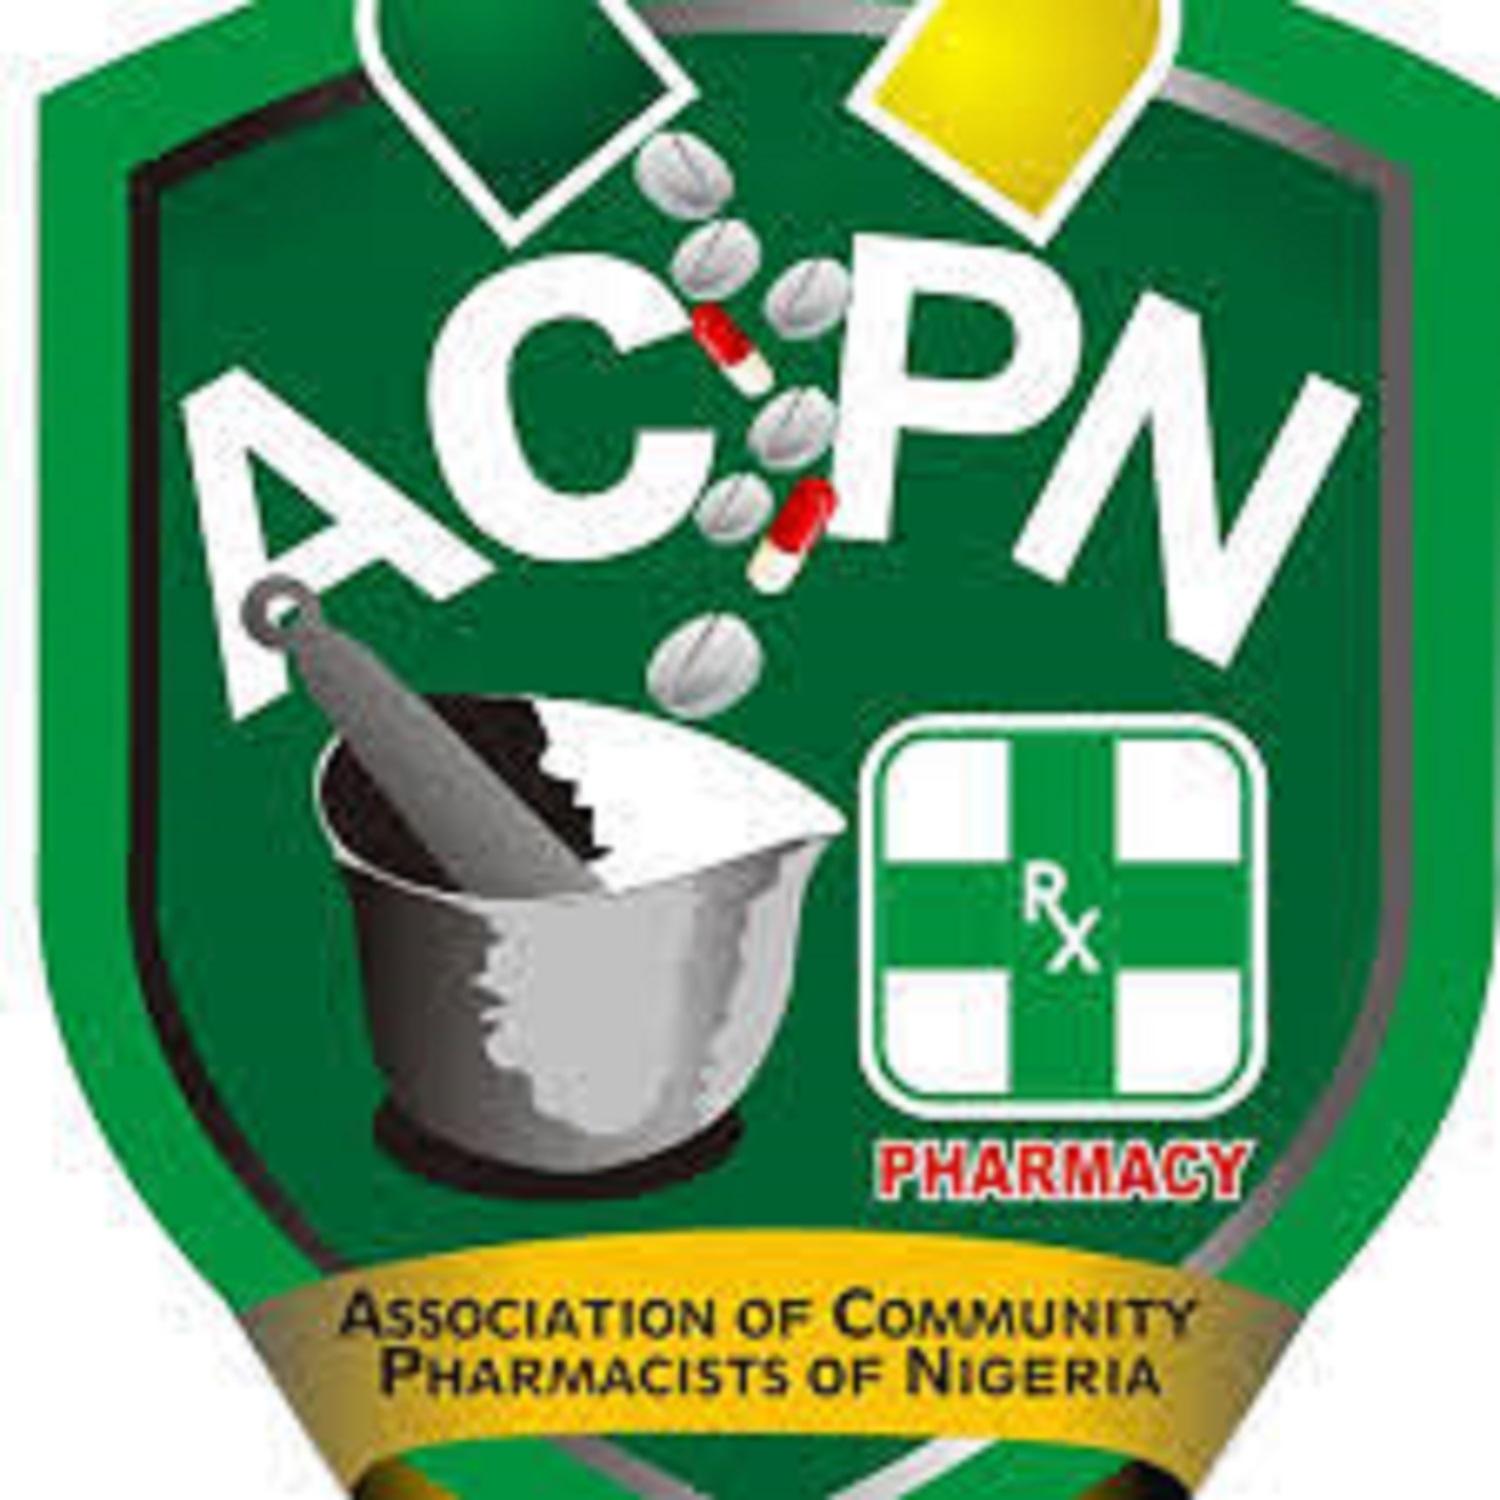 Community pharmacists worry over exposure of Nigerians to falsified medicines